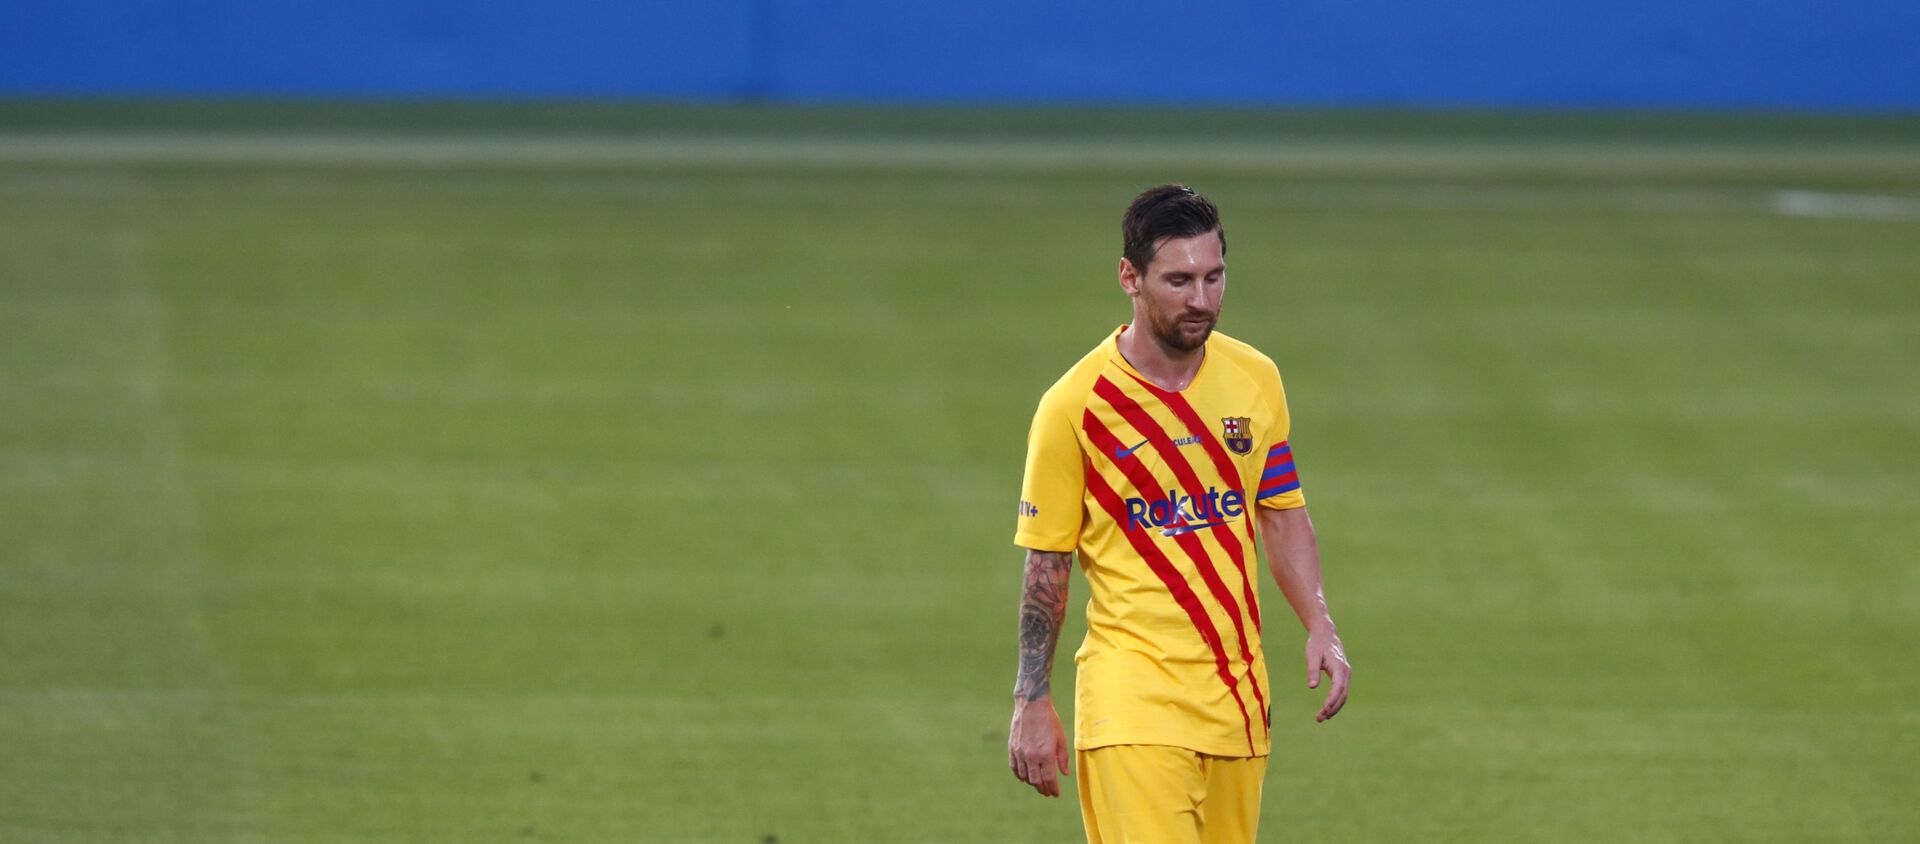 Barcelona's Lionel Messi leaves the field at half time during the pre-season friendly soccer match between Barcelona and Gimnastic at the Johan Cruyff Stadium in Barcelona, Spain, Saturday, 12 September 2020. - Sputnik International, 1920, 06.02.2021